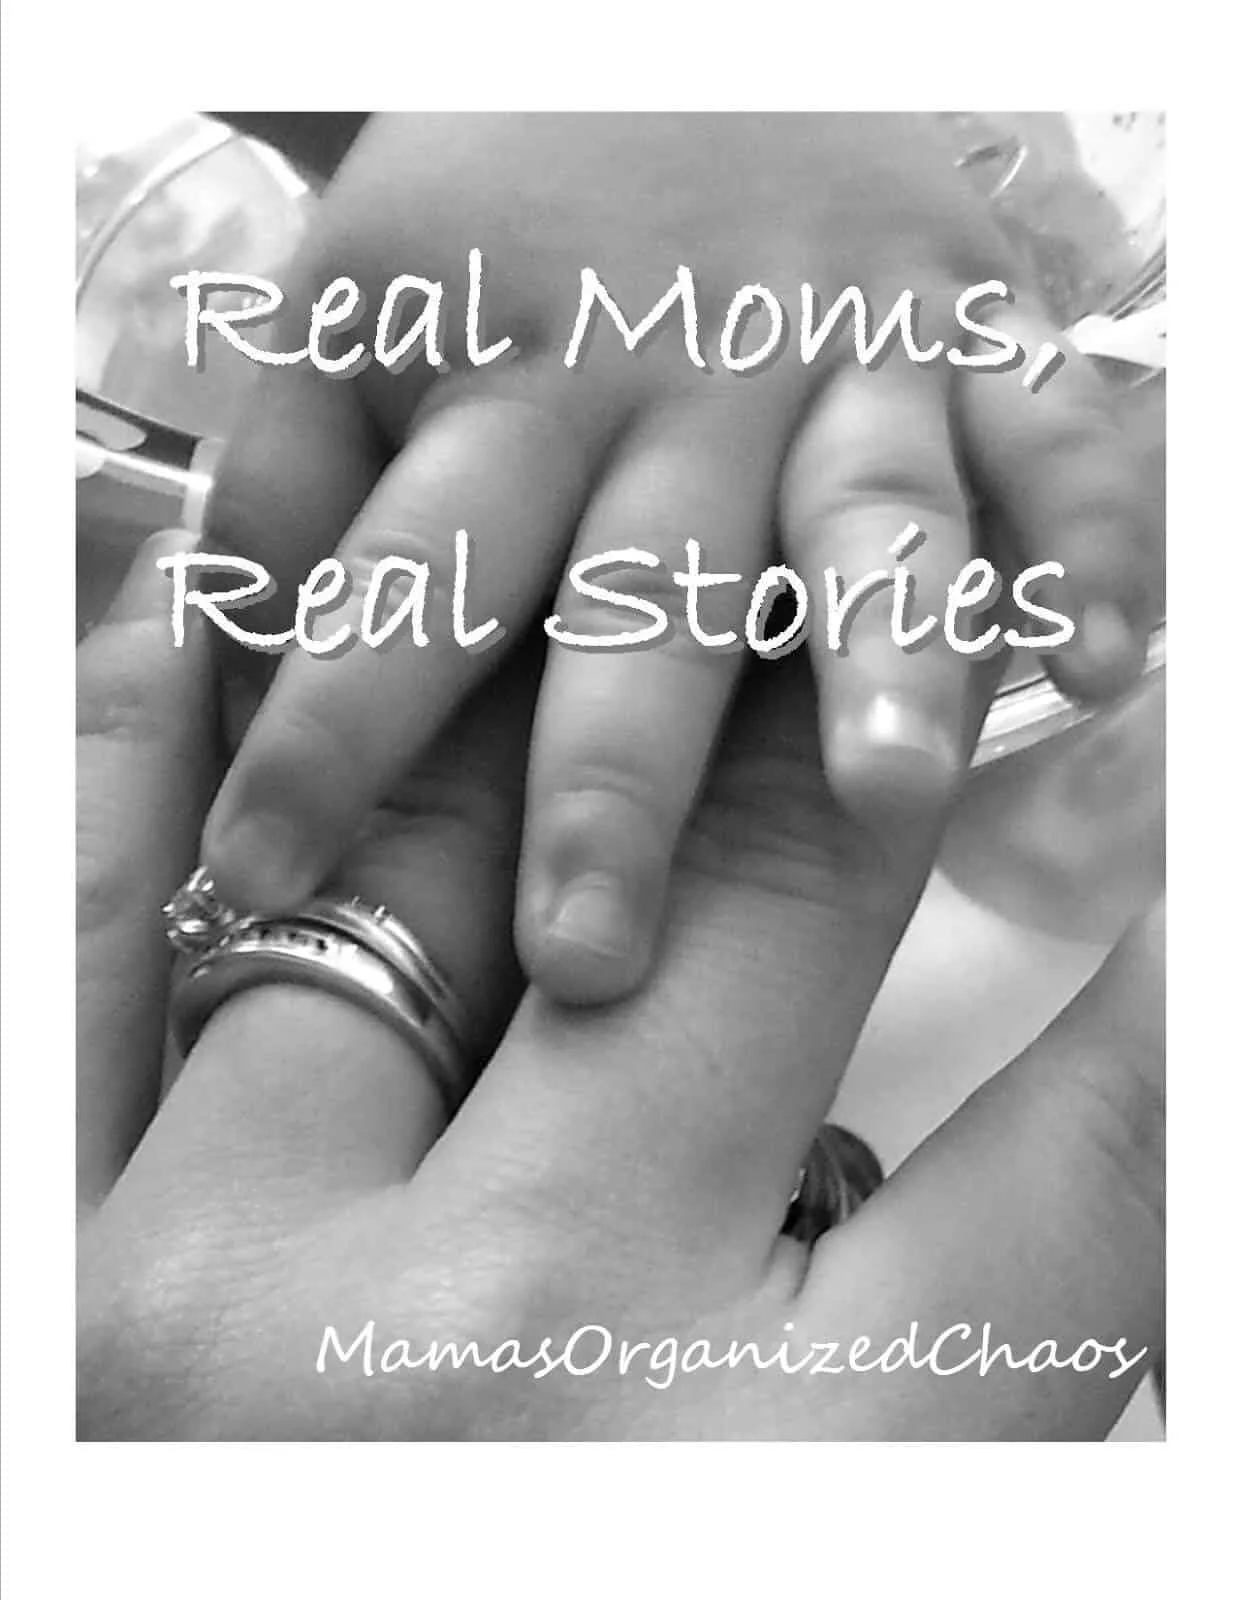 Real moms, real stories- the good the bad the positive the truth